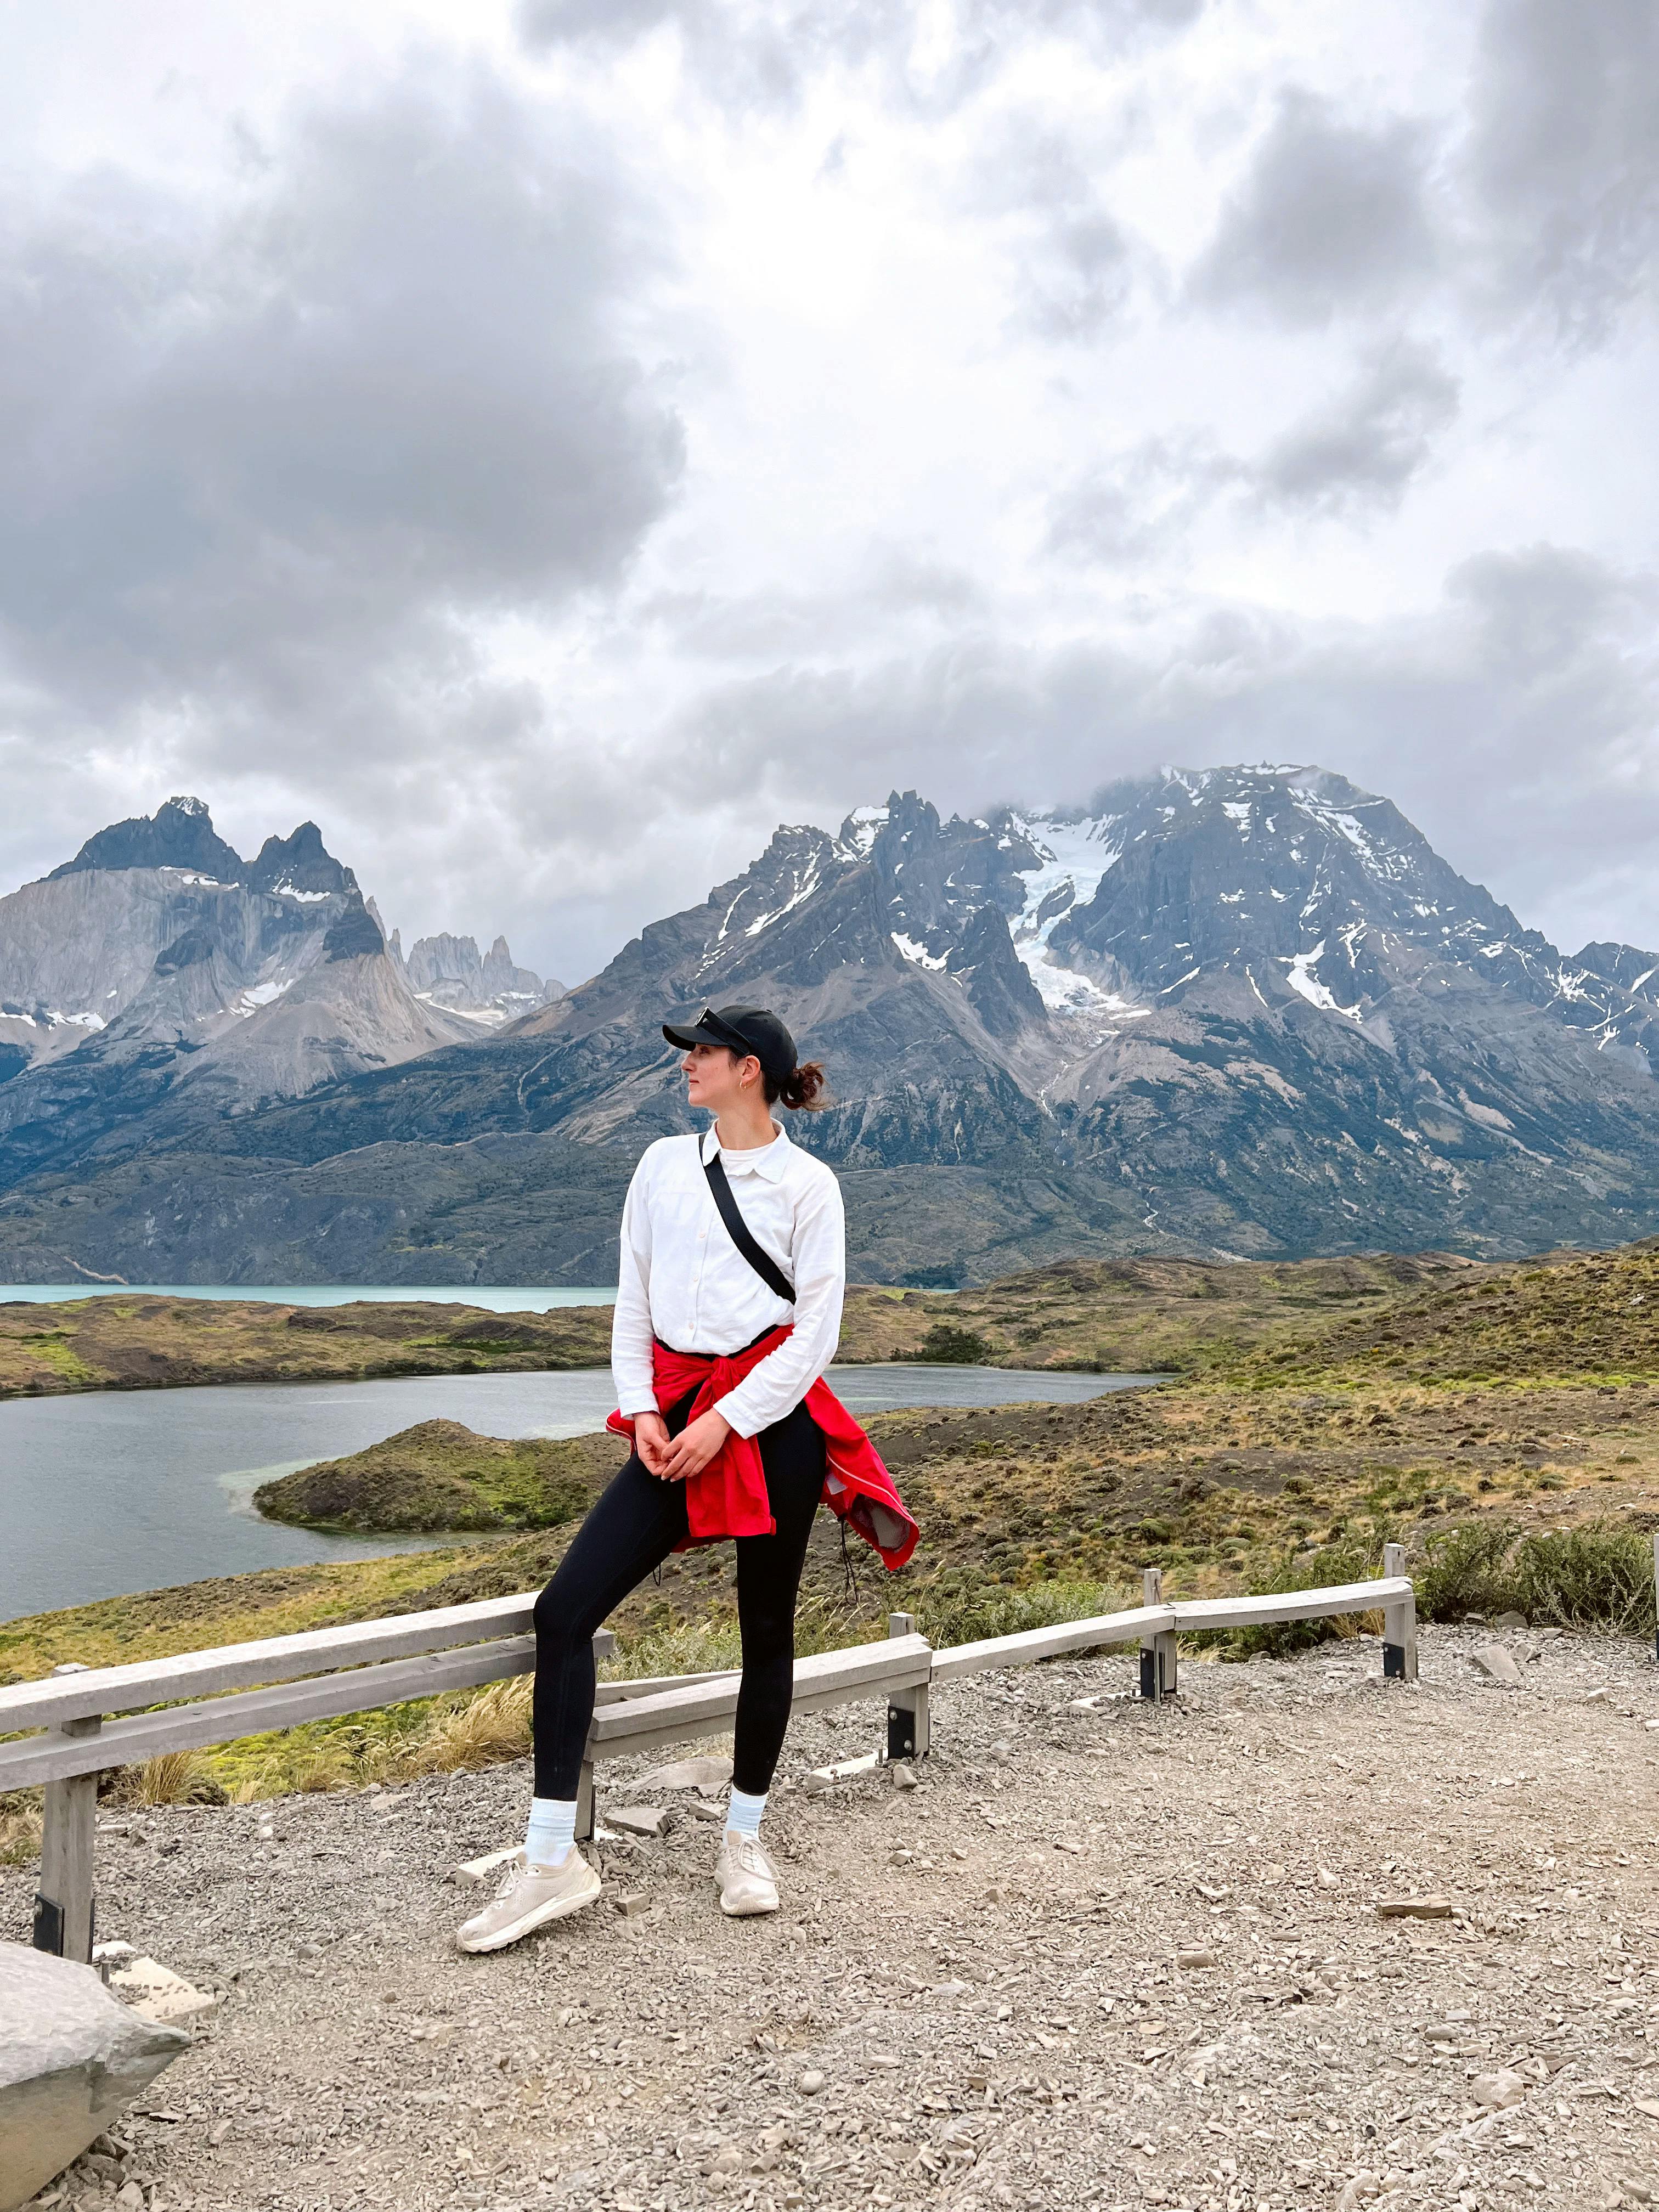 Alyssa stands in front of a mountain range in Patagonia.